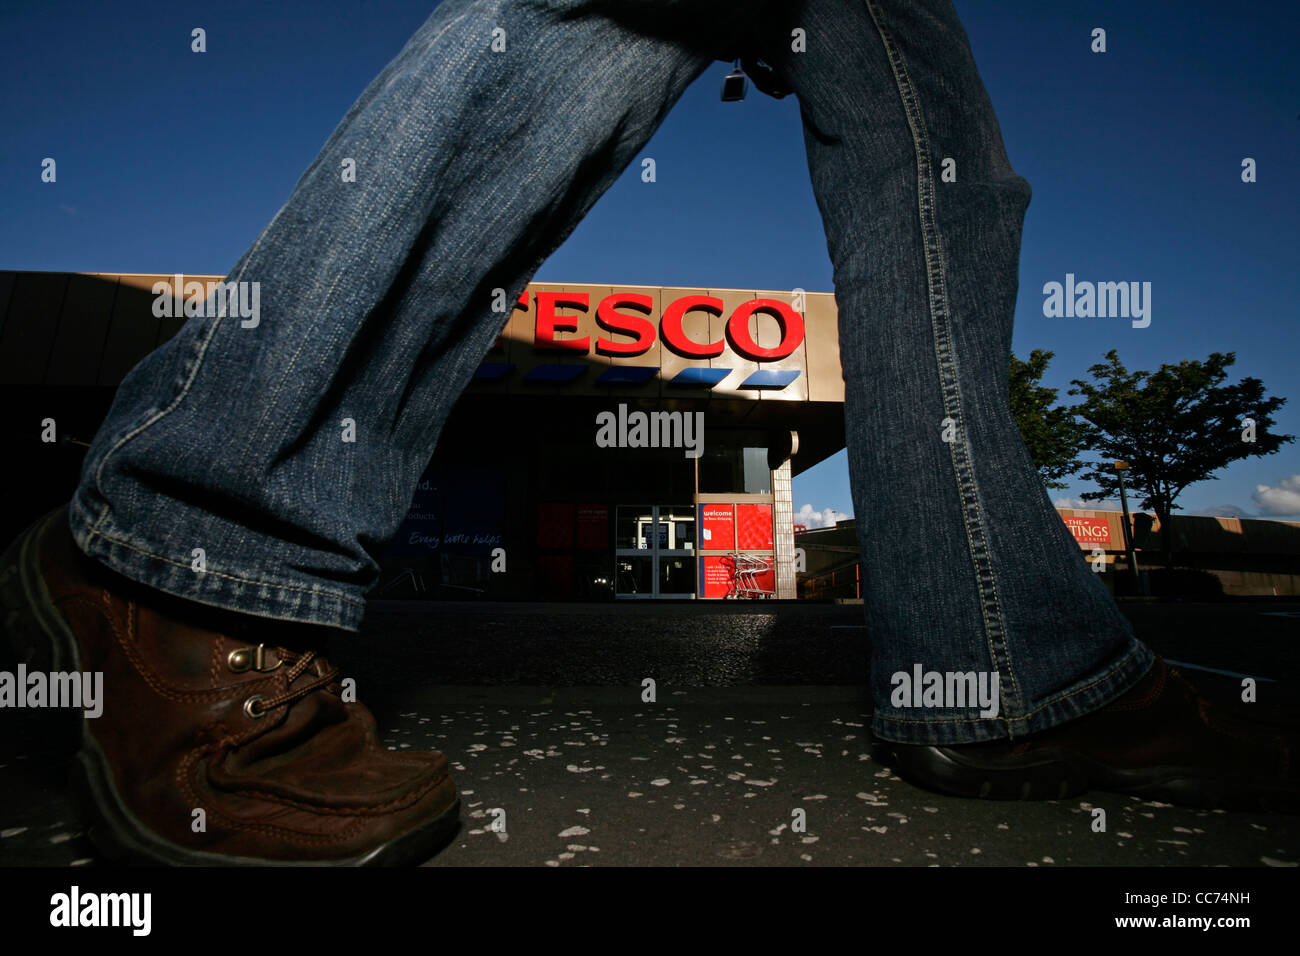 A Tesco store seen through the legs of someone walking past Stock Photo